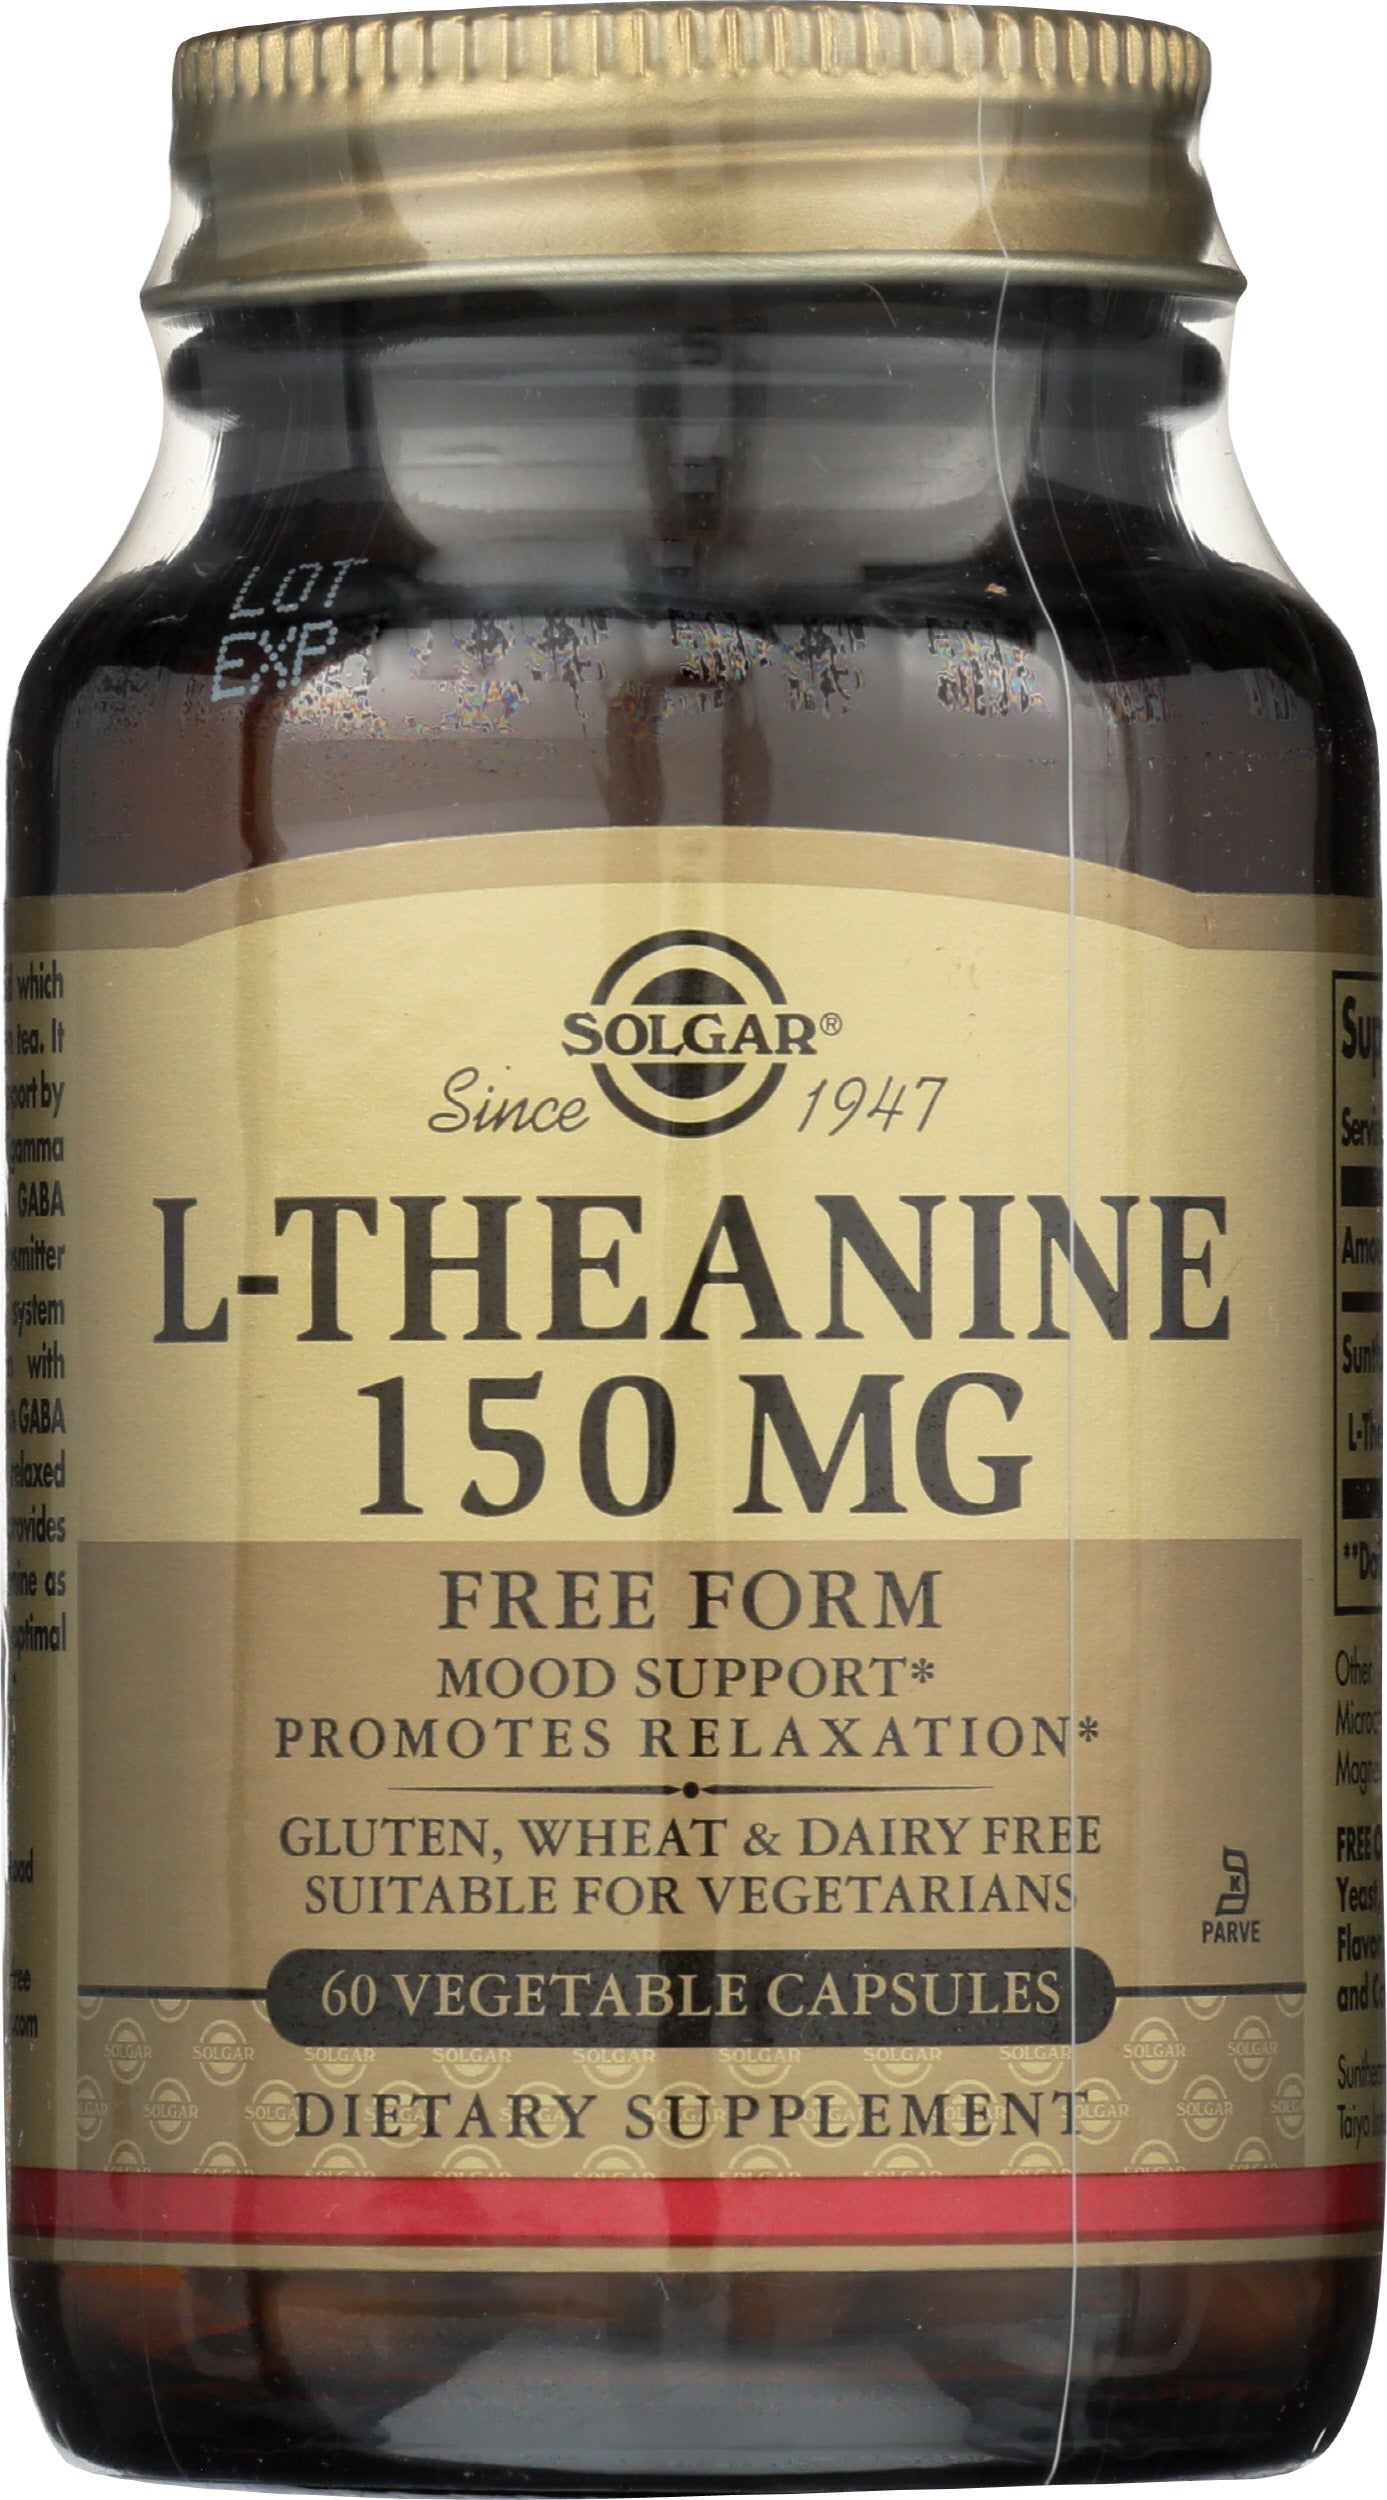 Solgar L-Theanine 150 mg 60 Vegetable Capsules Front